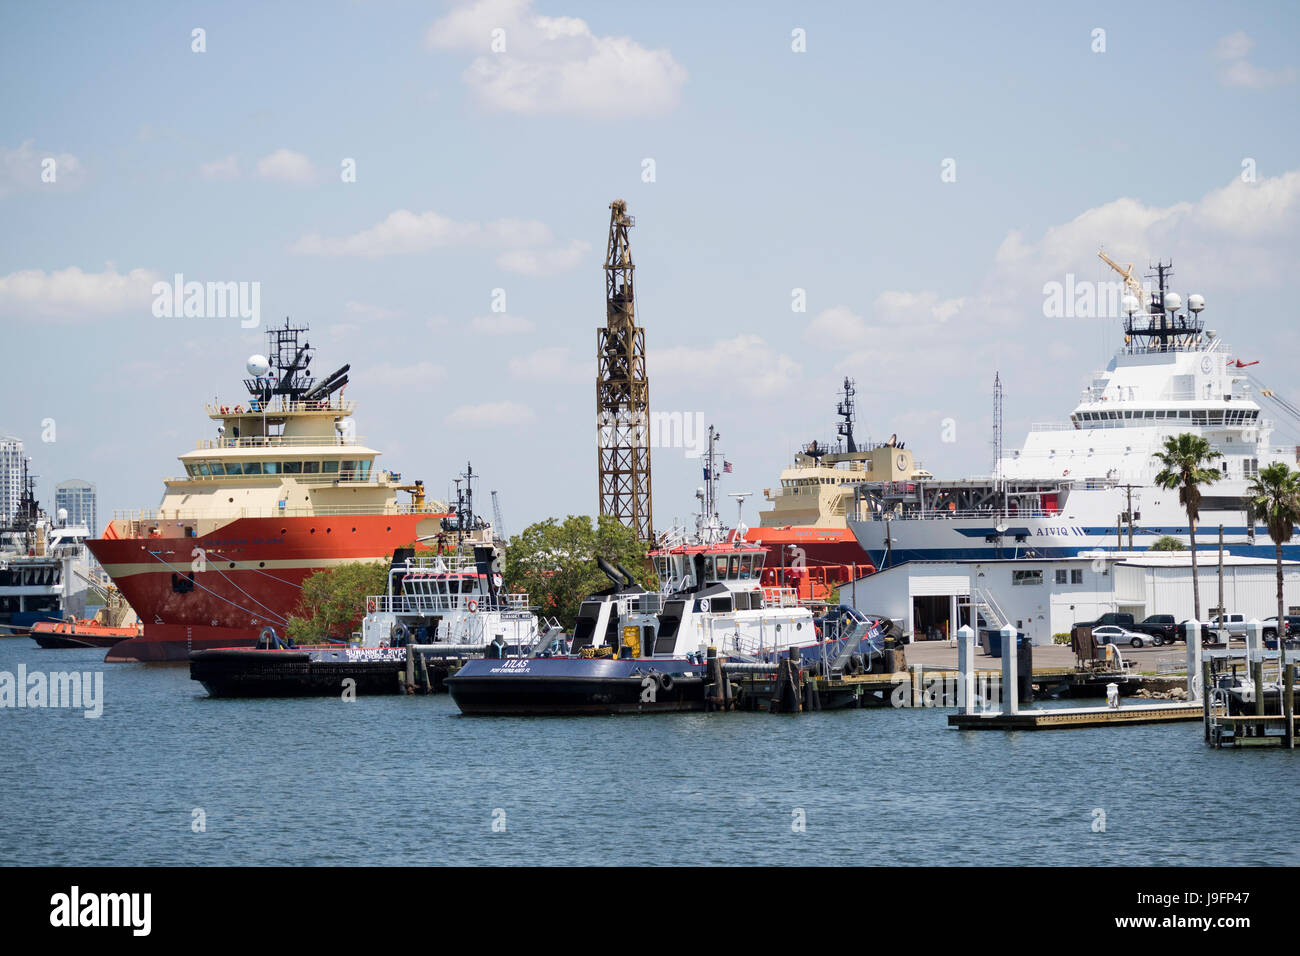 Tugs and offshore supply ships alongside in the Port of Tampa Florida USA. April 2017 Stock Photo